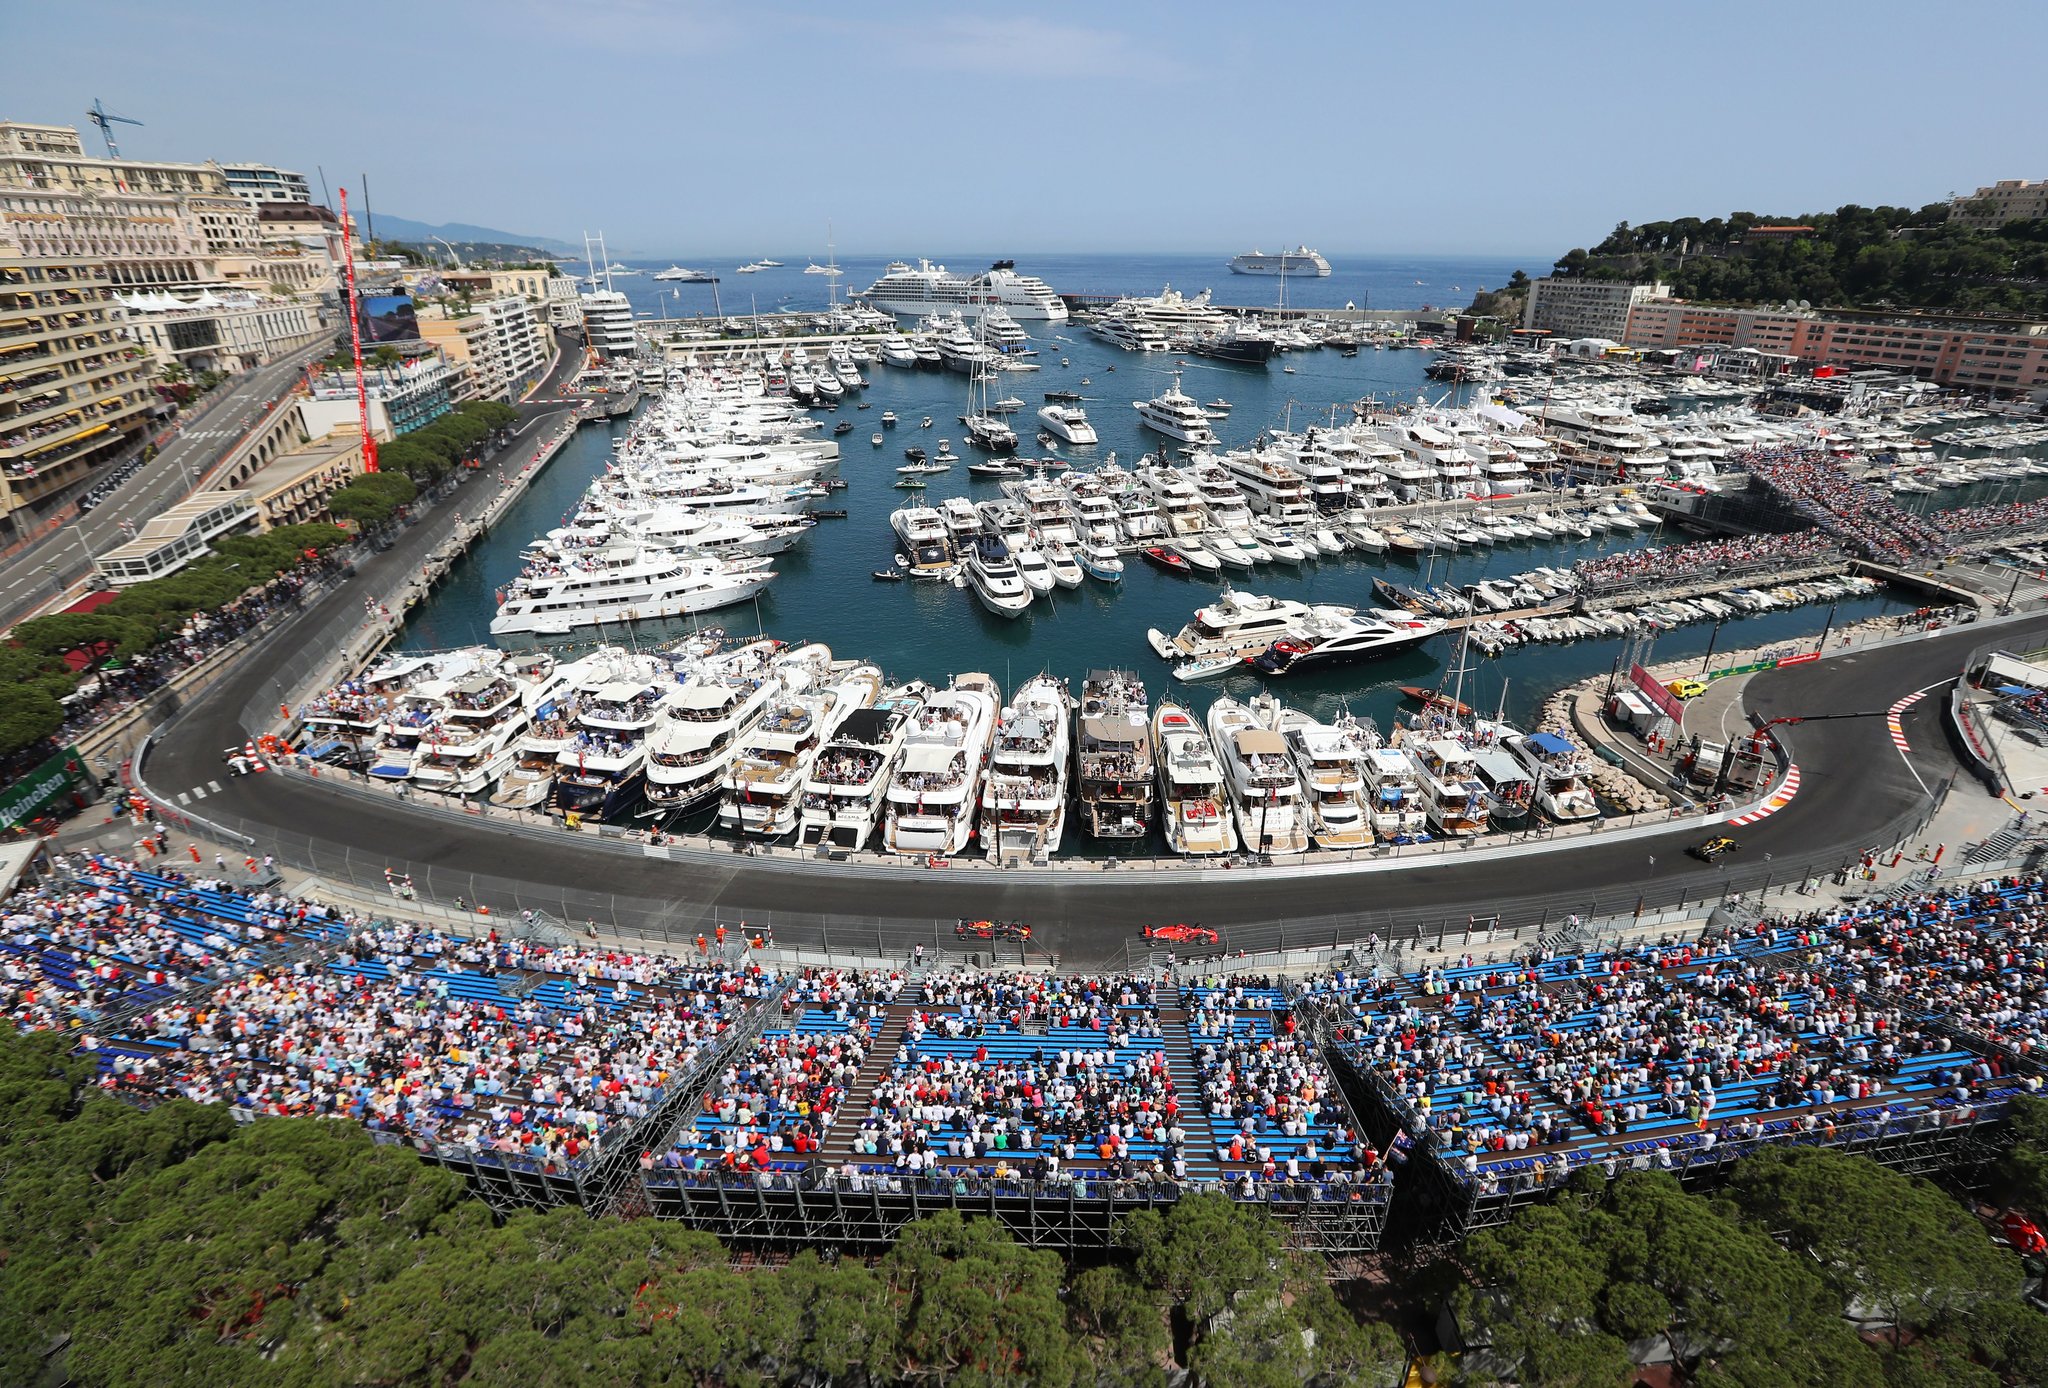 DESTINATION GUIDE: What fans can eat, see and do when they visit Monaco for the Grand Prix